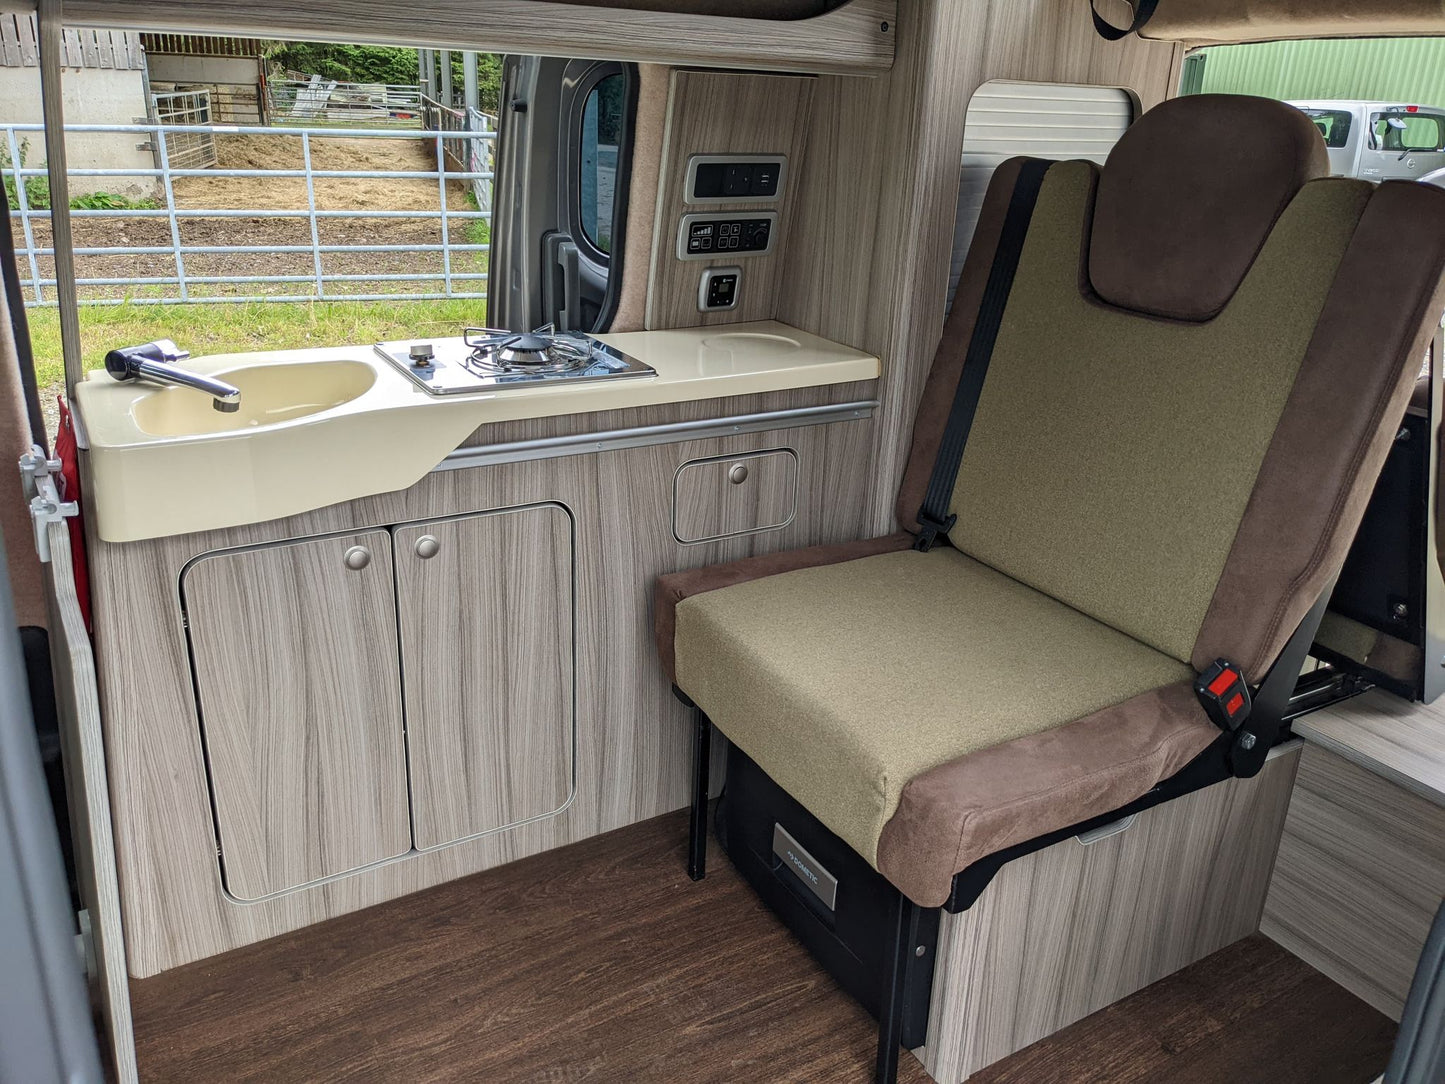 The Bliss Solo Single Rock 'n' Roll bed for Nissan Nv200 2009+ Renault Trafic & Nissan NV300 2014+ - cccampers.myshopify.com